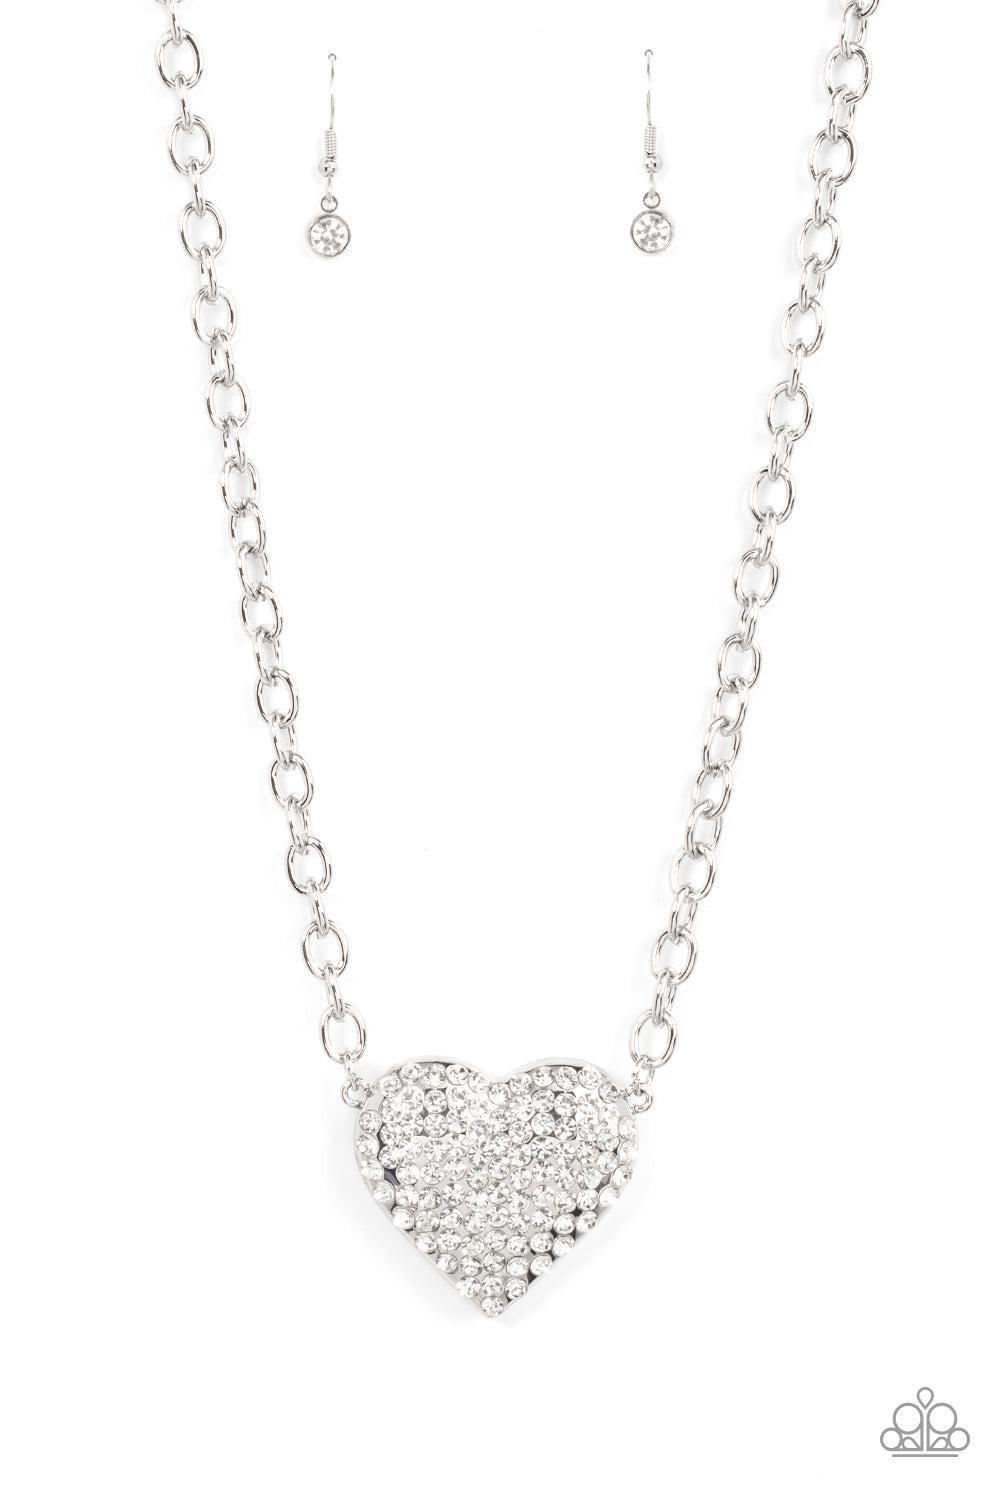 Heartbreakingly Blingy White Rhinestone Heart Necklace - Paparazzi Accessories- lightbox - CarasShop.com - $5 Jewelry by Cara Jewels